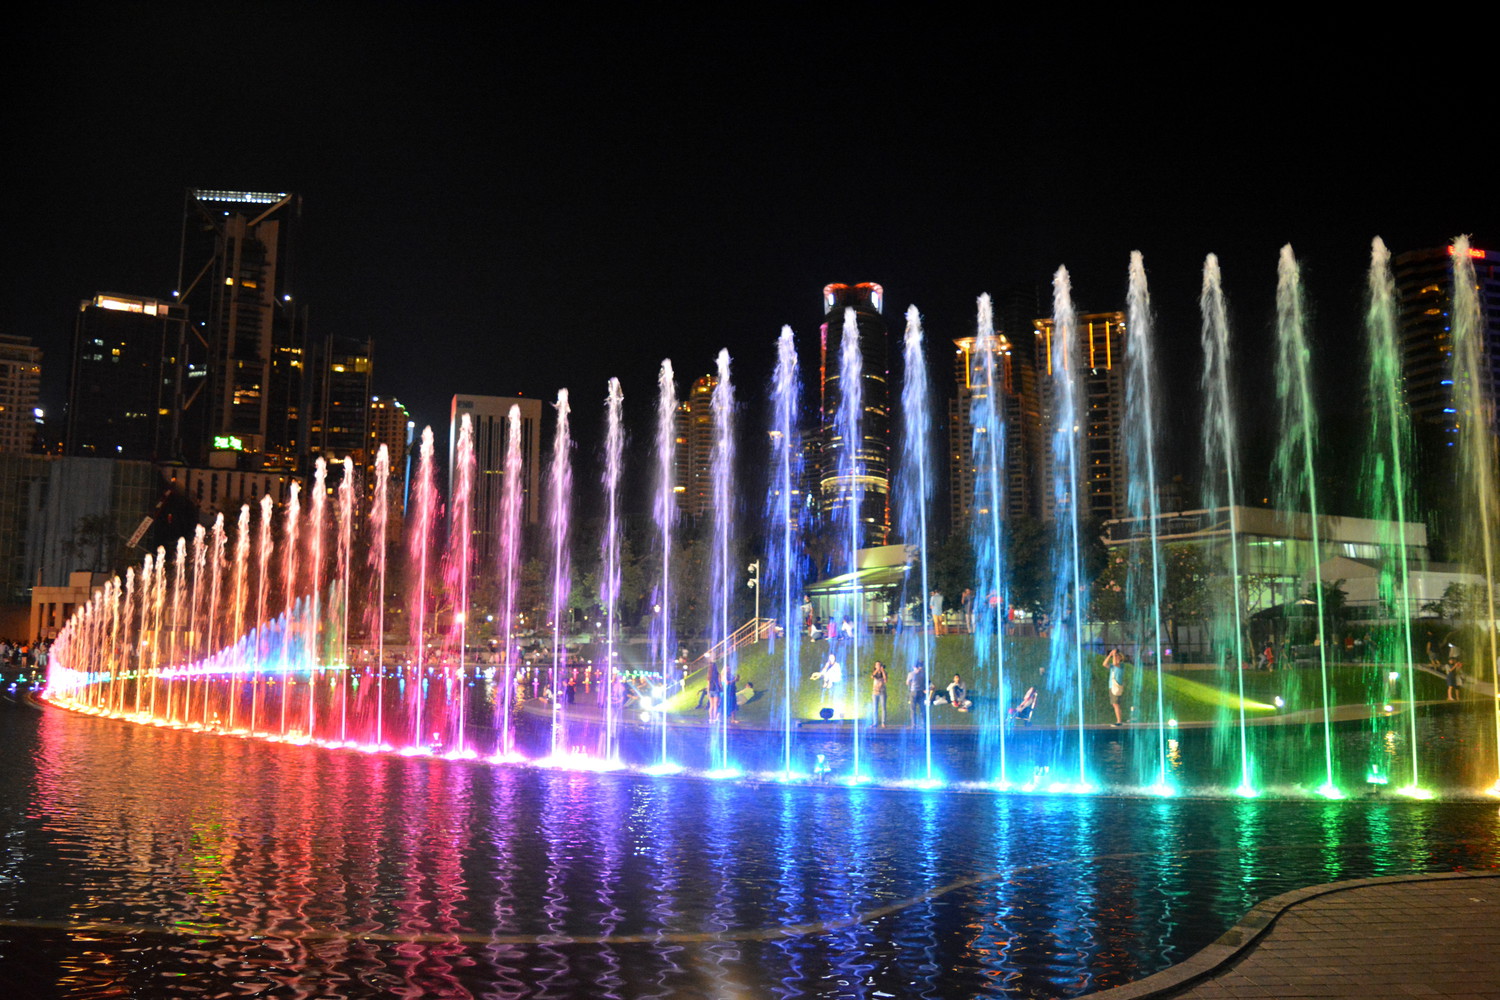 Musical fountain at Simfoni Lake in the evening; the water fountains are lit up by colorful lights